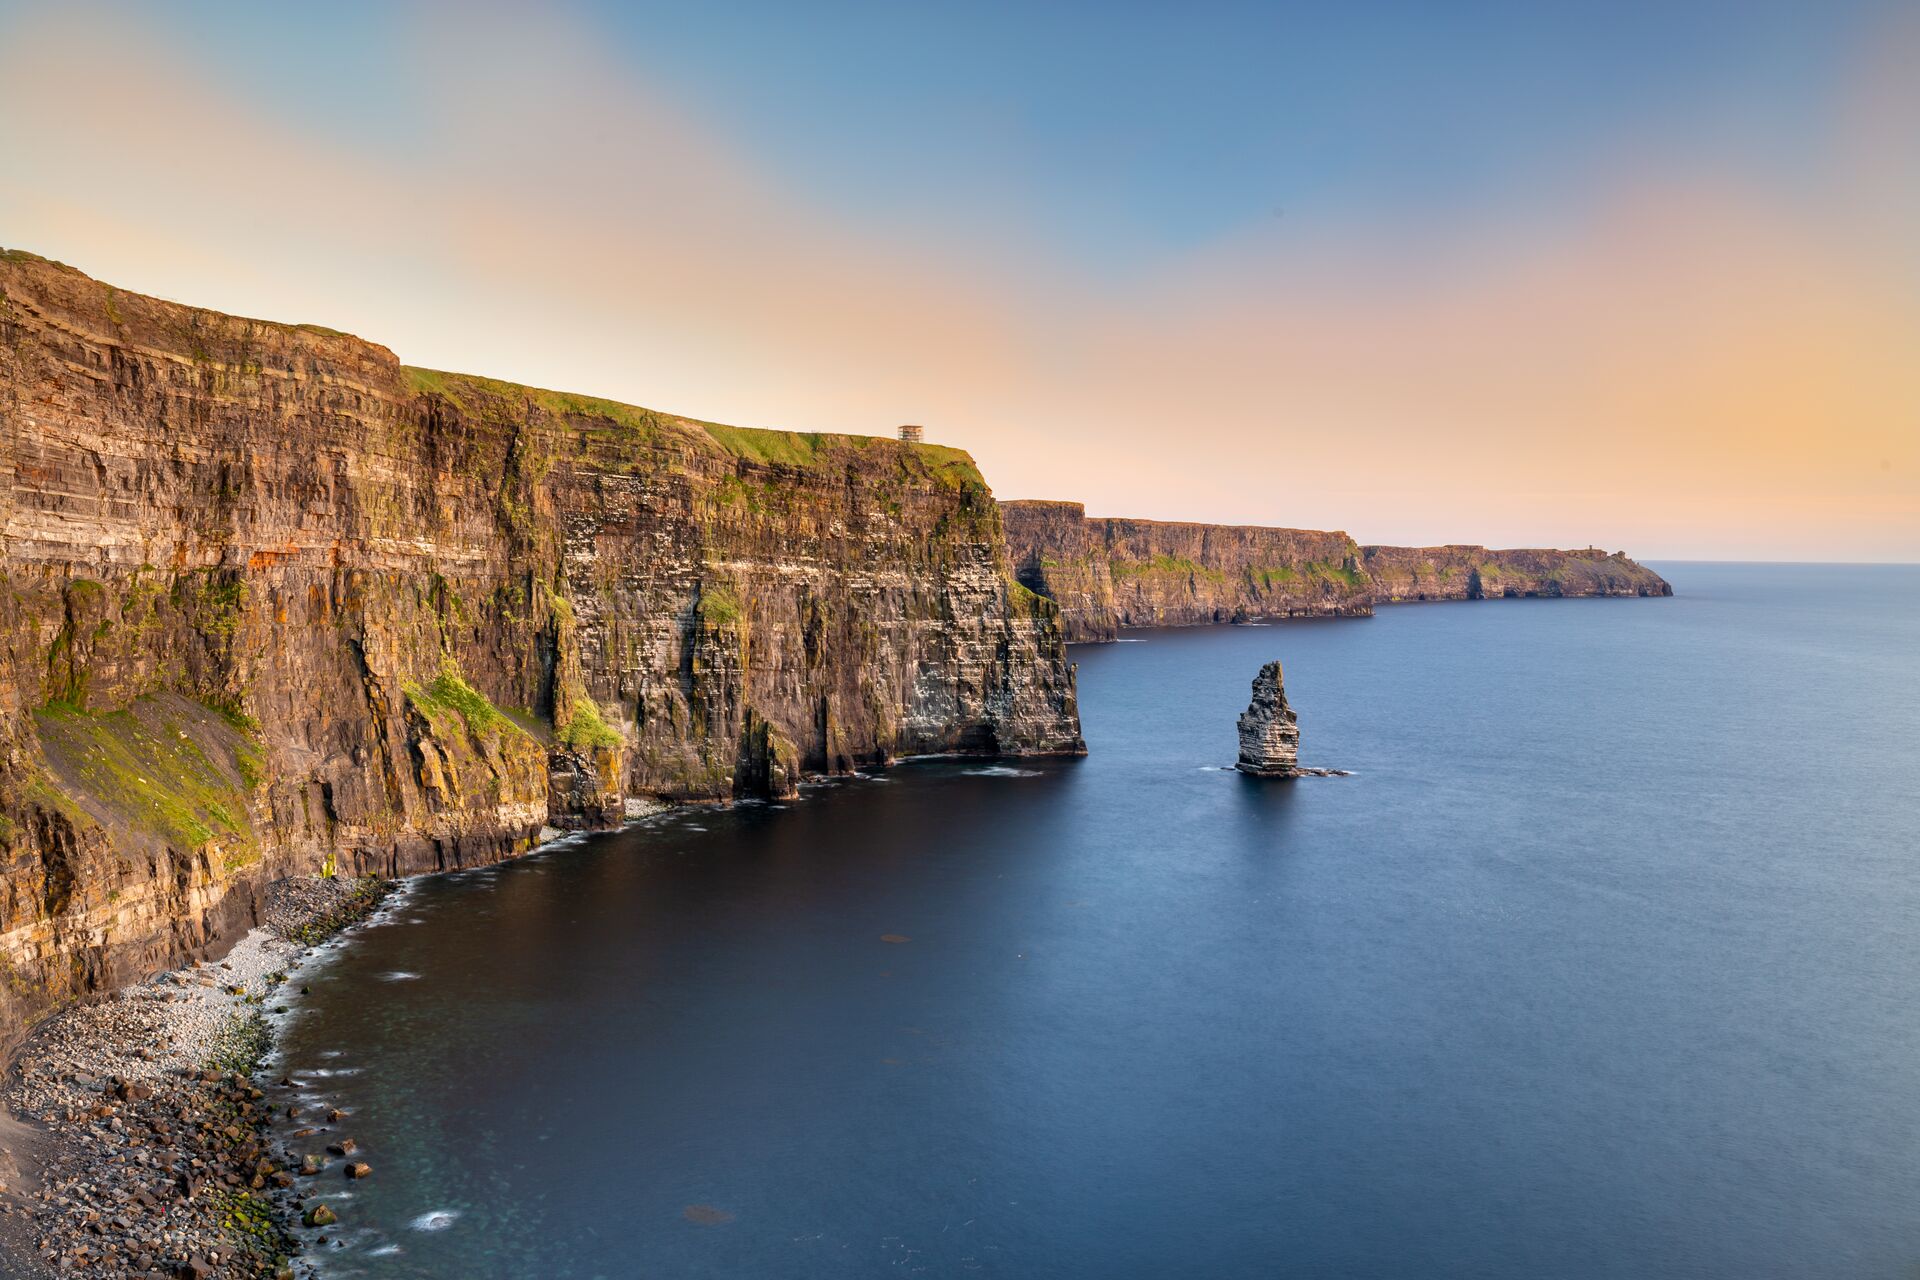 The striking high cliffs of Moher overlook the dark blue waters with a blue sky and lighlty coloured clouds up above